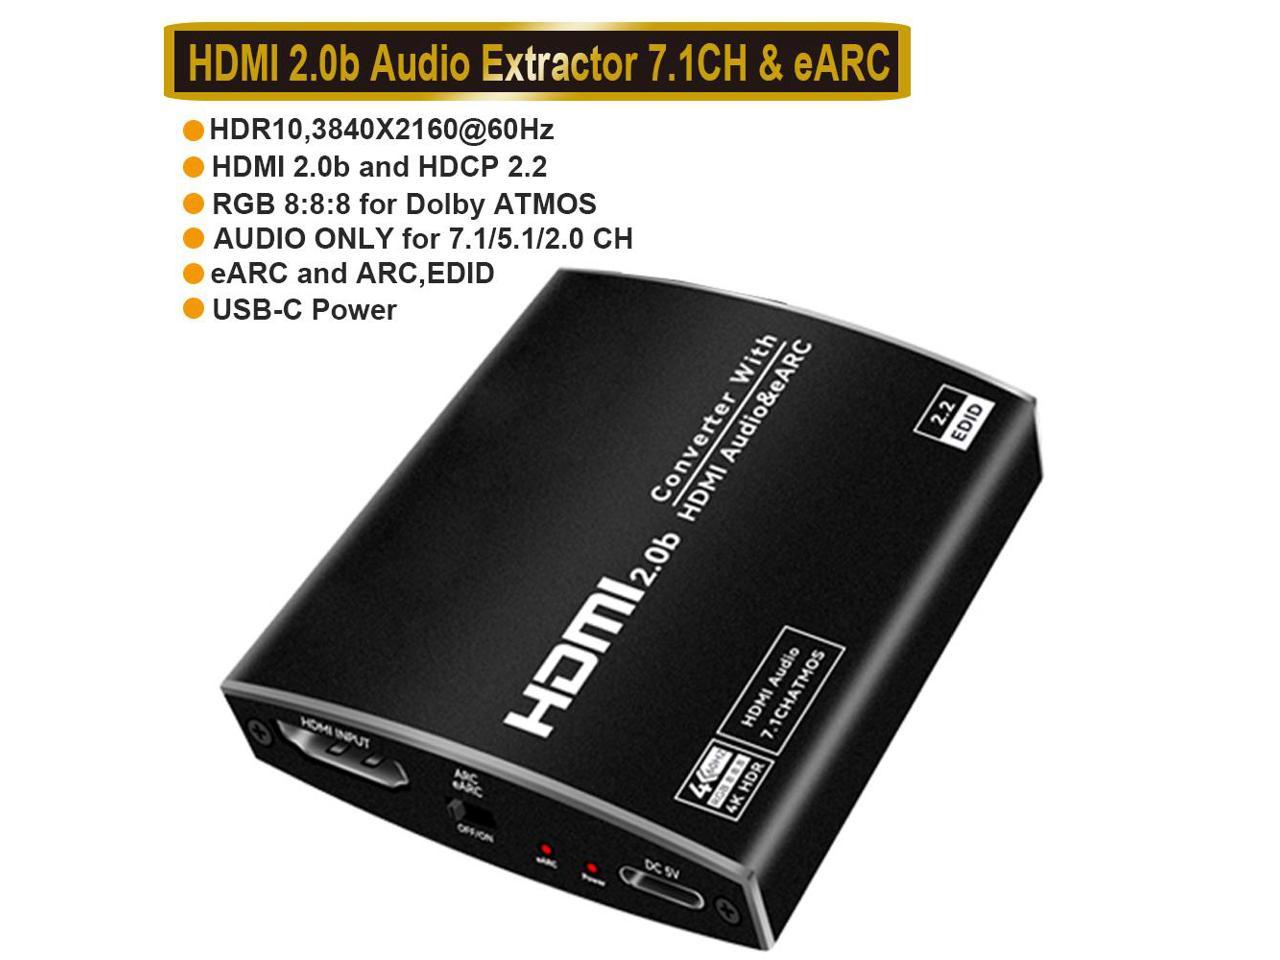 LUOM HDMI Audio Extractor 4K 60Hz ARC Audio HDR10 Splitter Audio Converter RGB 8:8:8(7.1CH Dolby atmos),EDID,Dolby Vision,HDR 10 Newegg.com